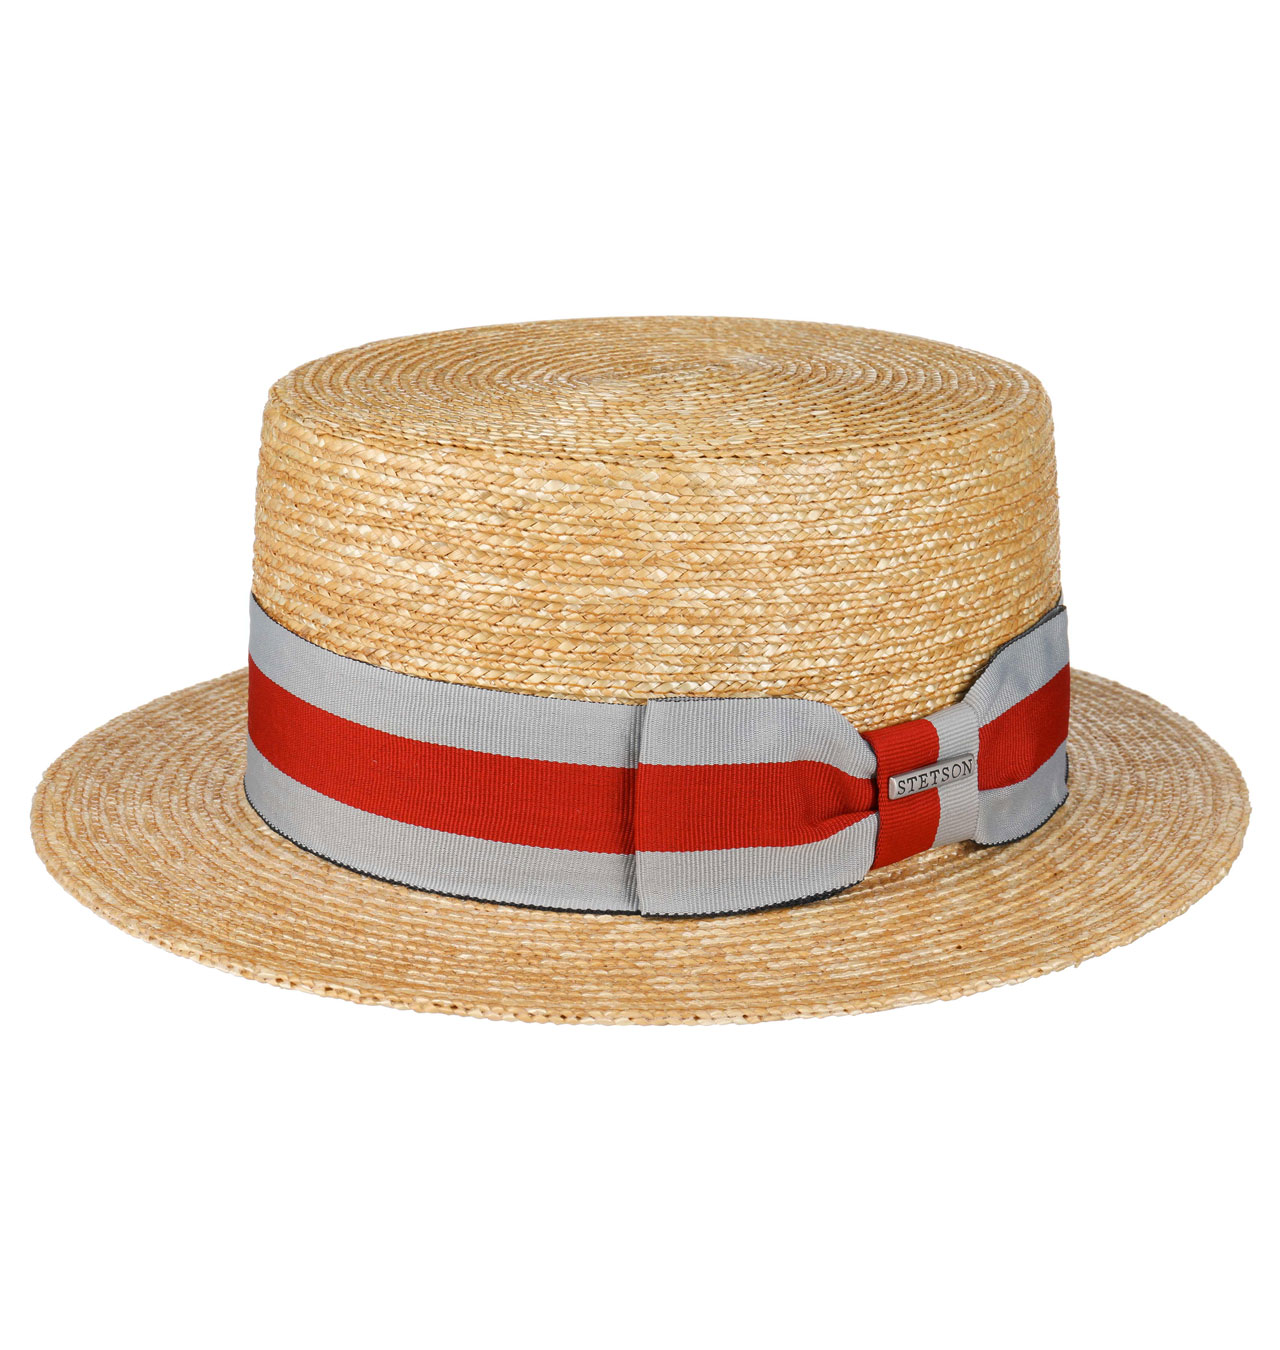 Stetson---Wheat-Boater-Straw-Hat-1